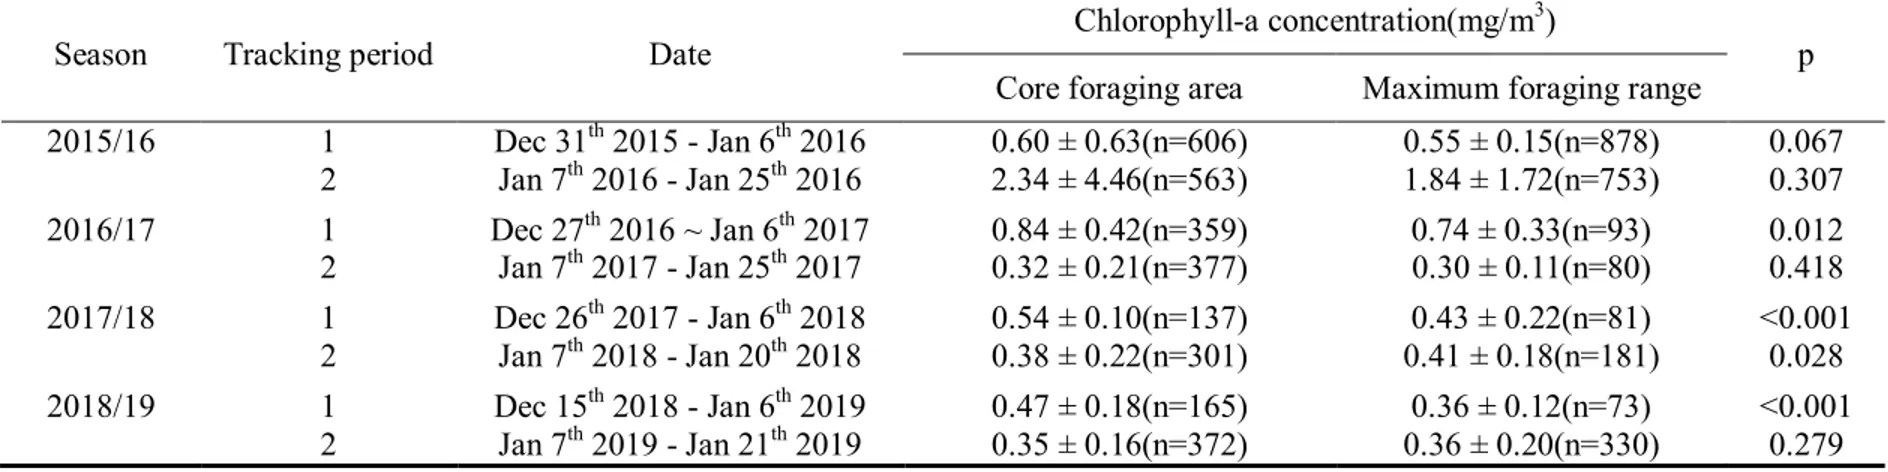 Table 7. The chlorophyll-a concentrations in the core foraging areas and maximum foraging ranges of the tracked Chinstrap Penguins  in each period